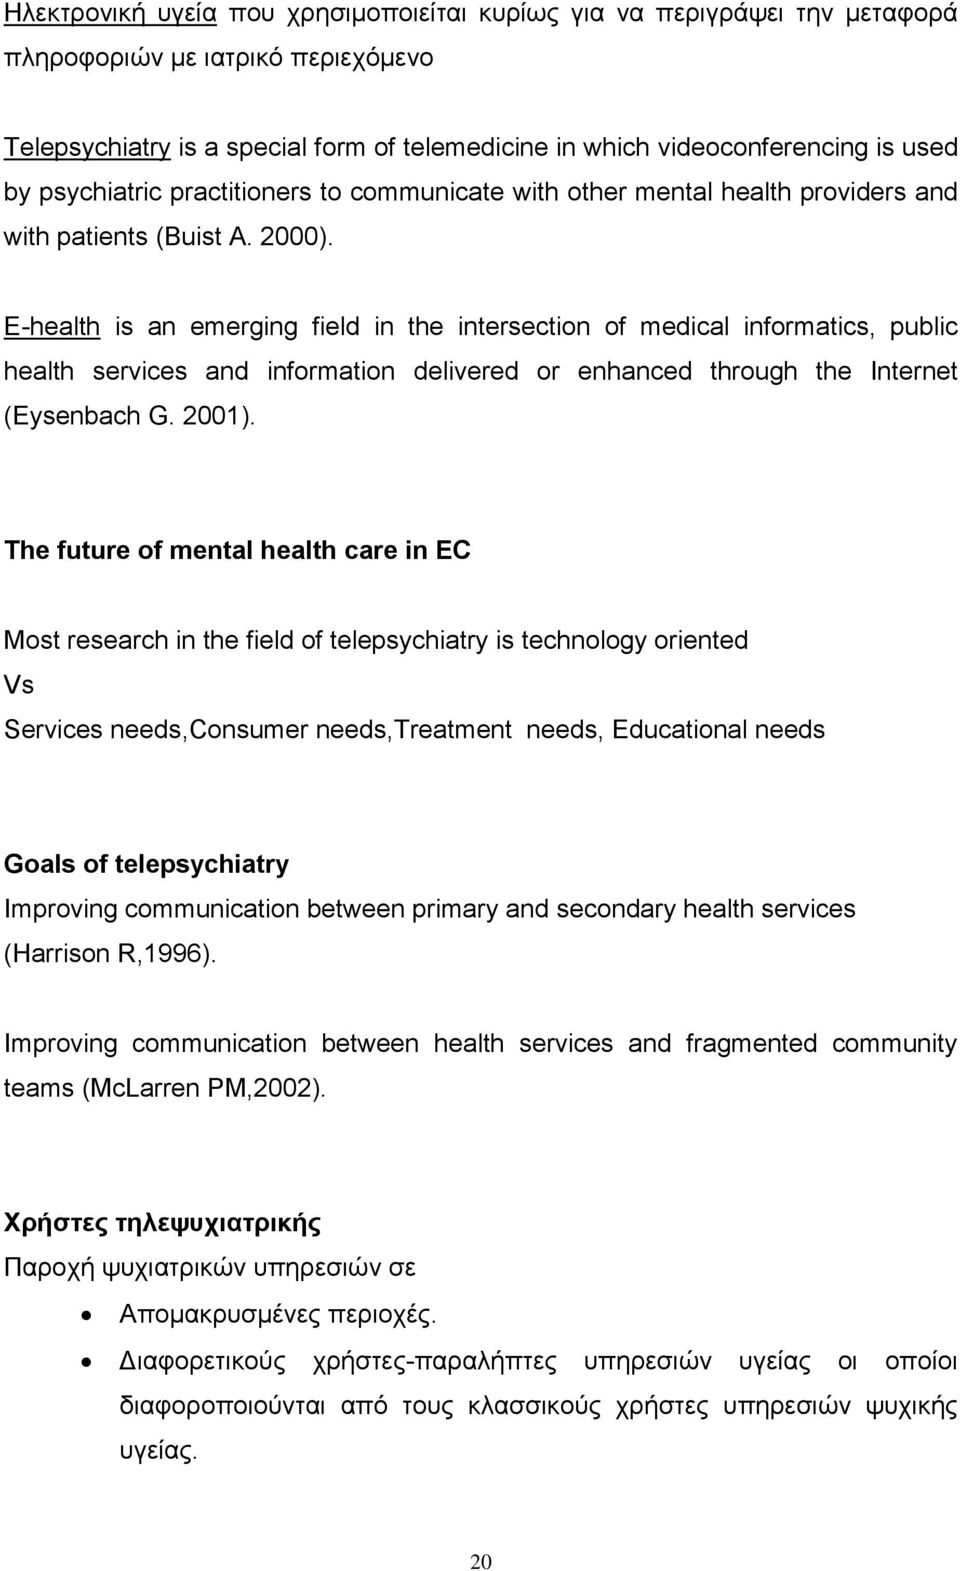 E-health is an emerging field in the intersection of medical informatics, public health services and information delivered or enhanced through the Internet (Eysenbach G. 2001).